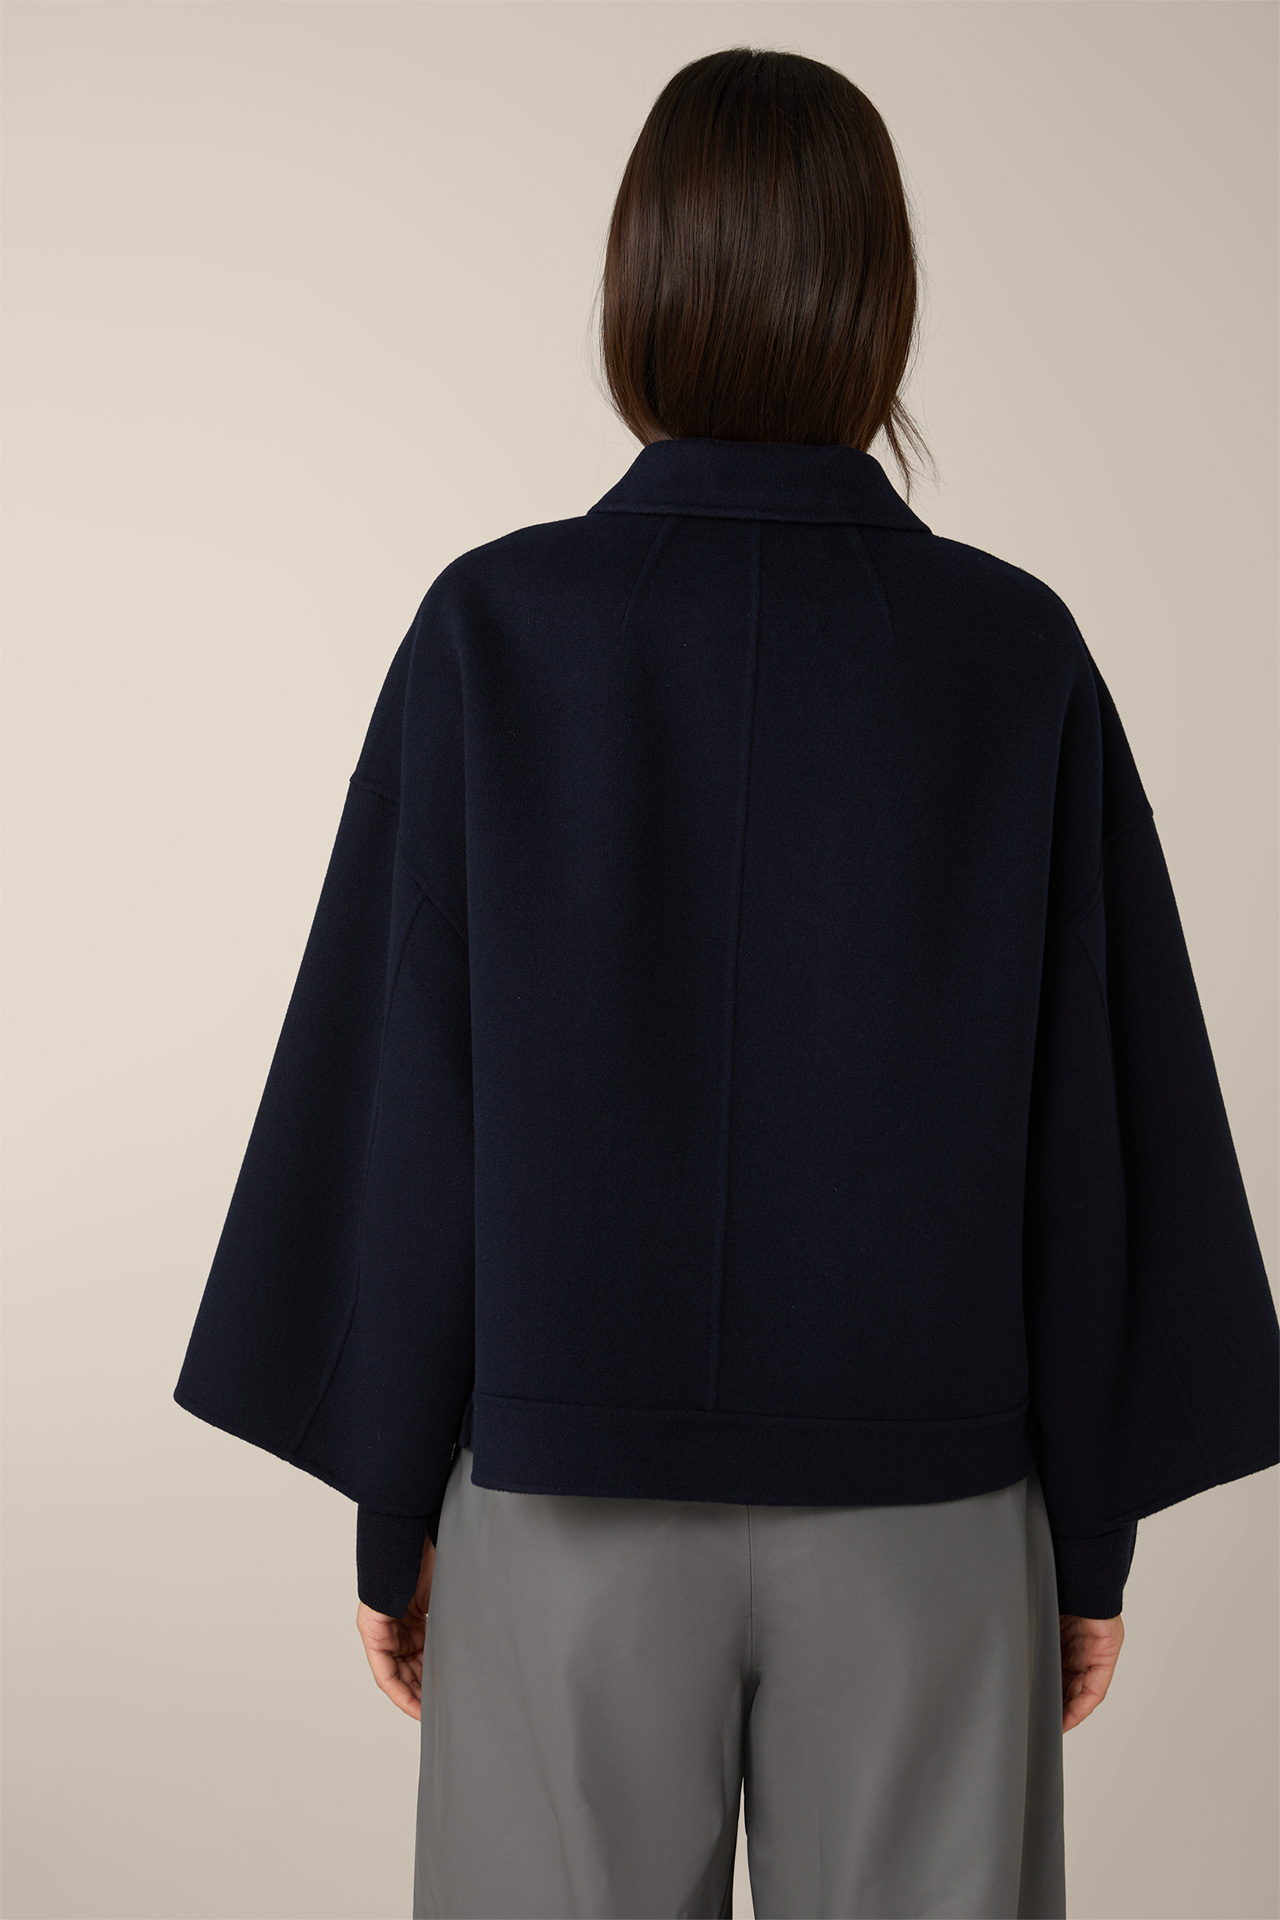 Double-faced Cape Jacket in Navy